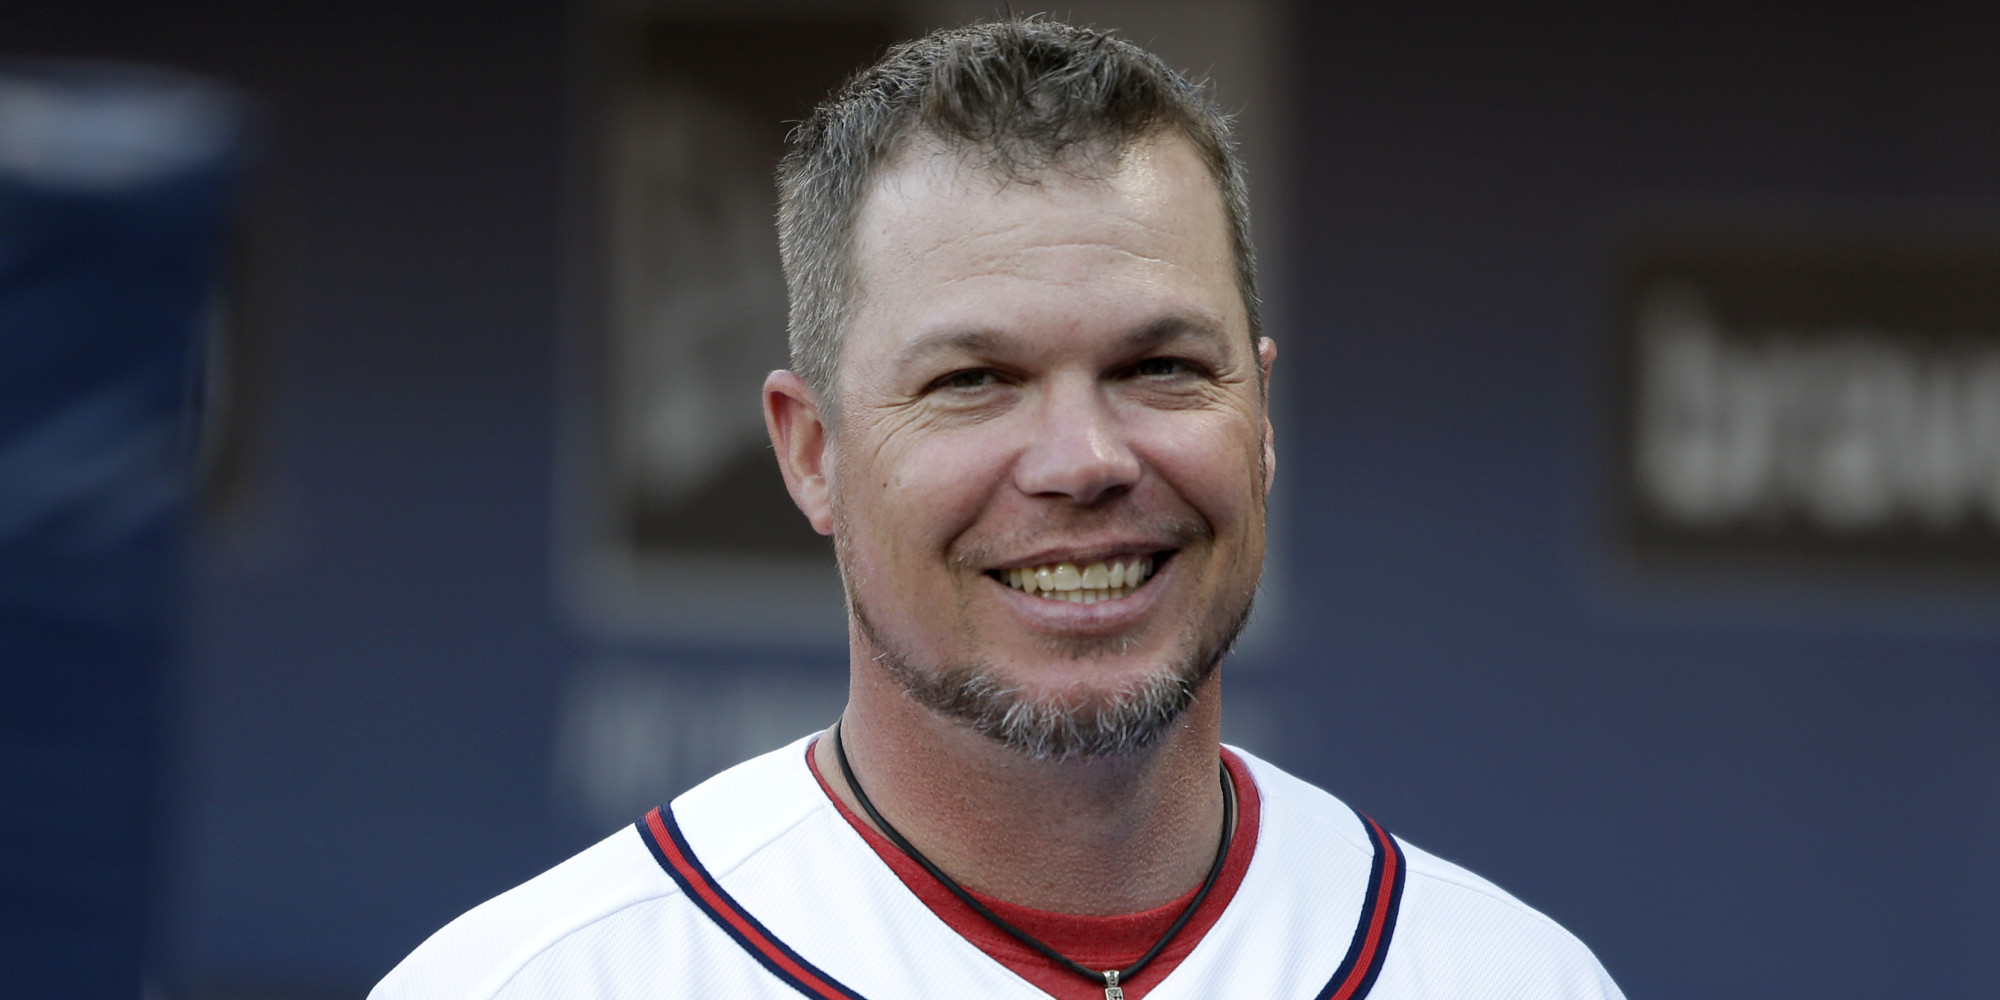 Chipper Jones: Where is the Former Florida Prep Star Now? - ITG Next